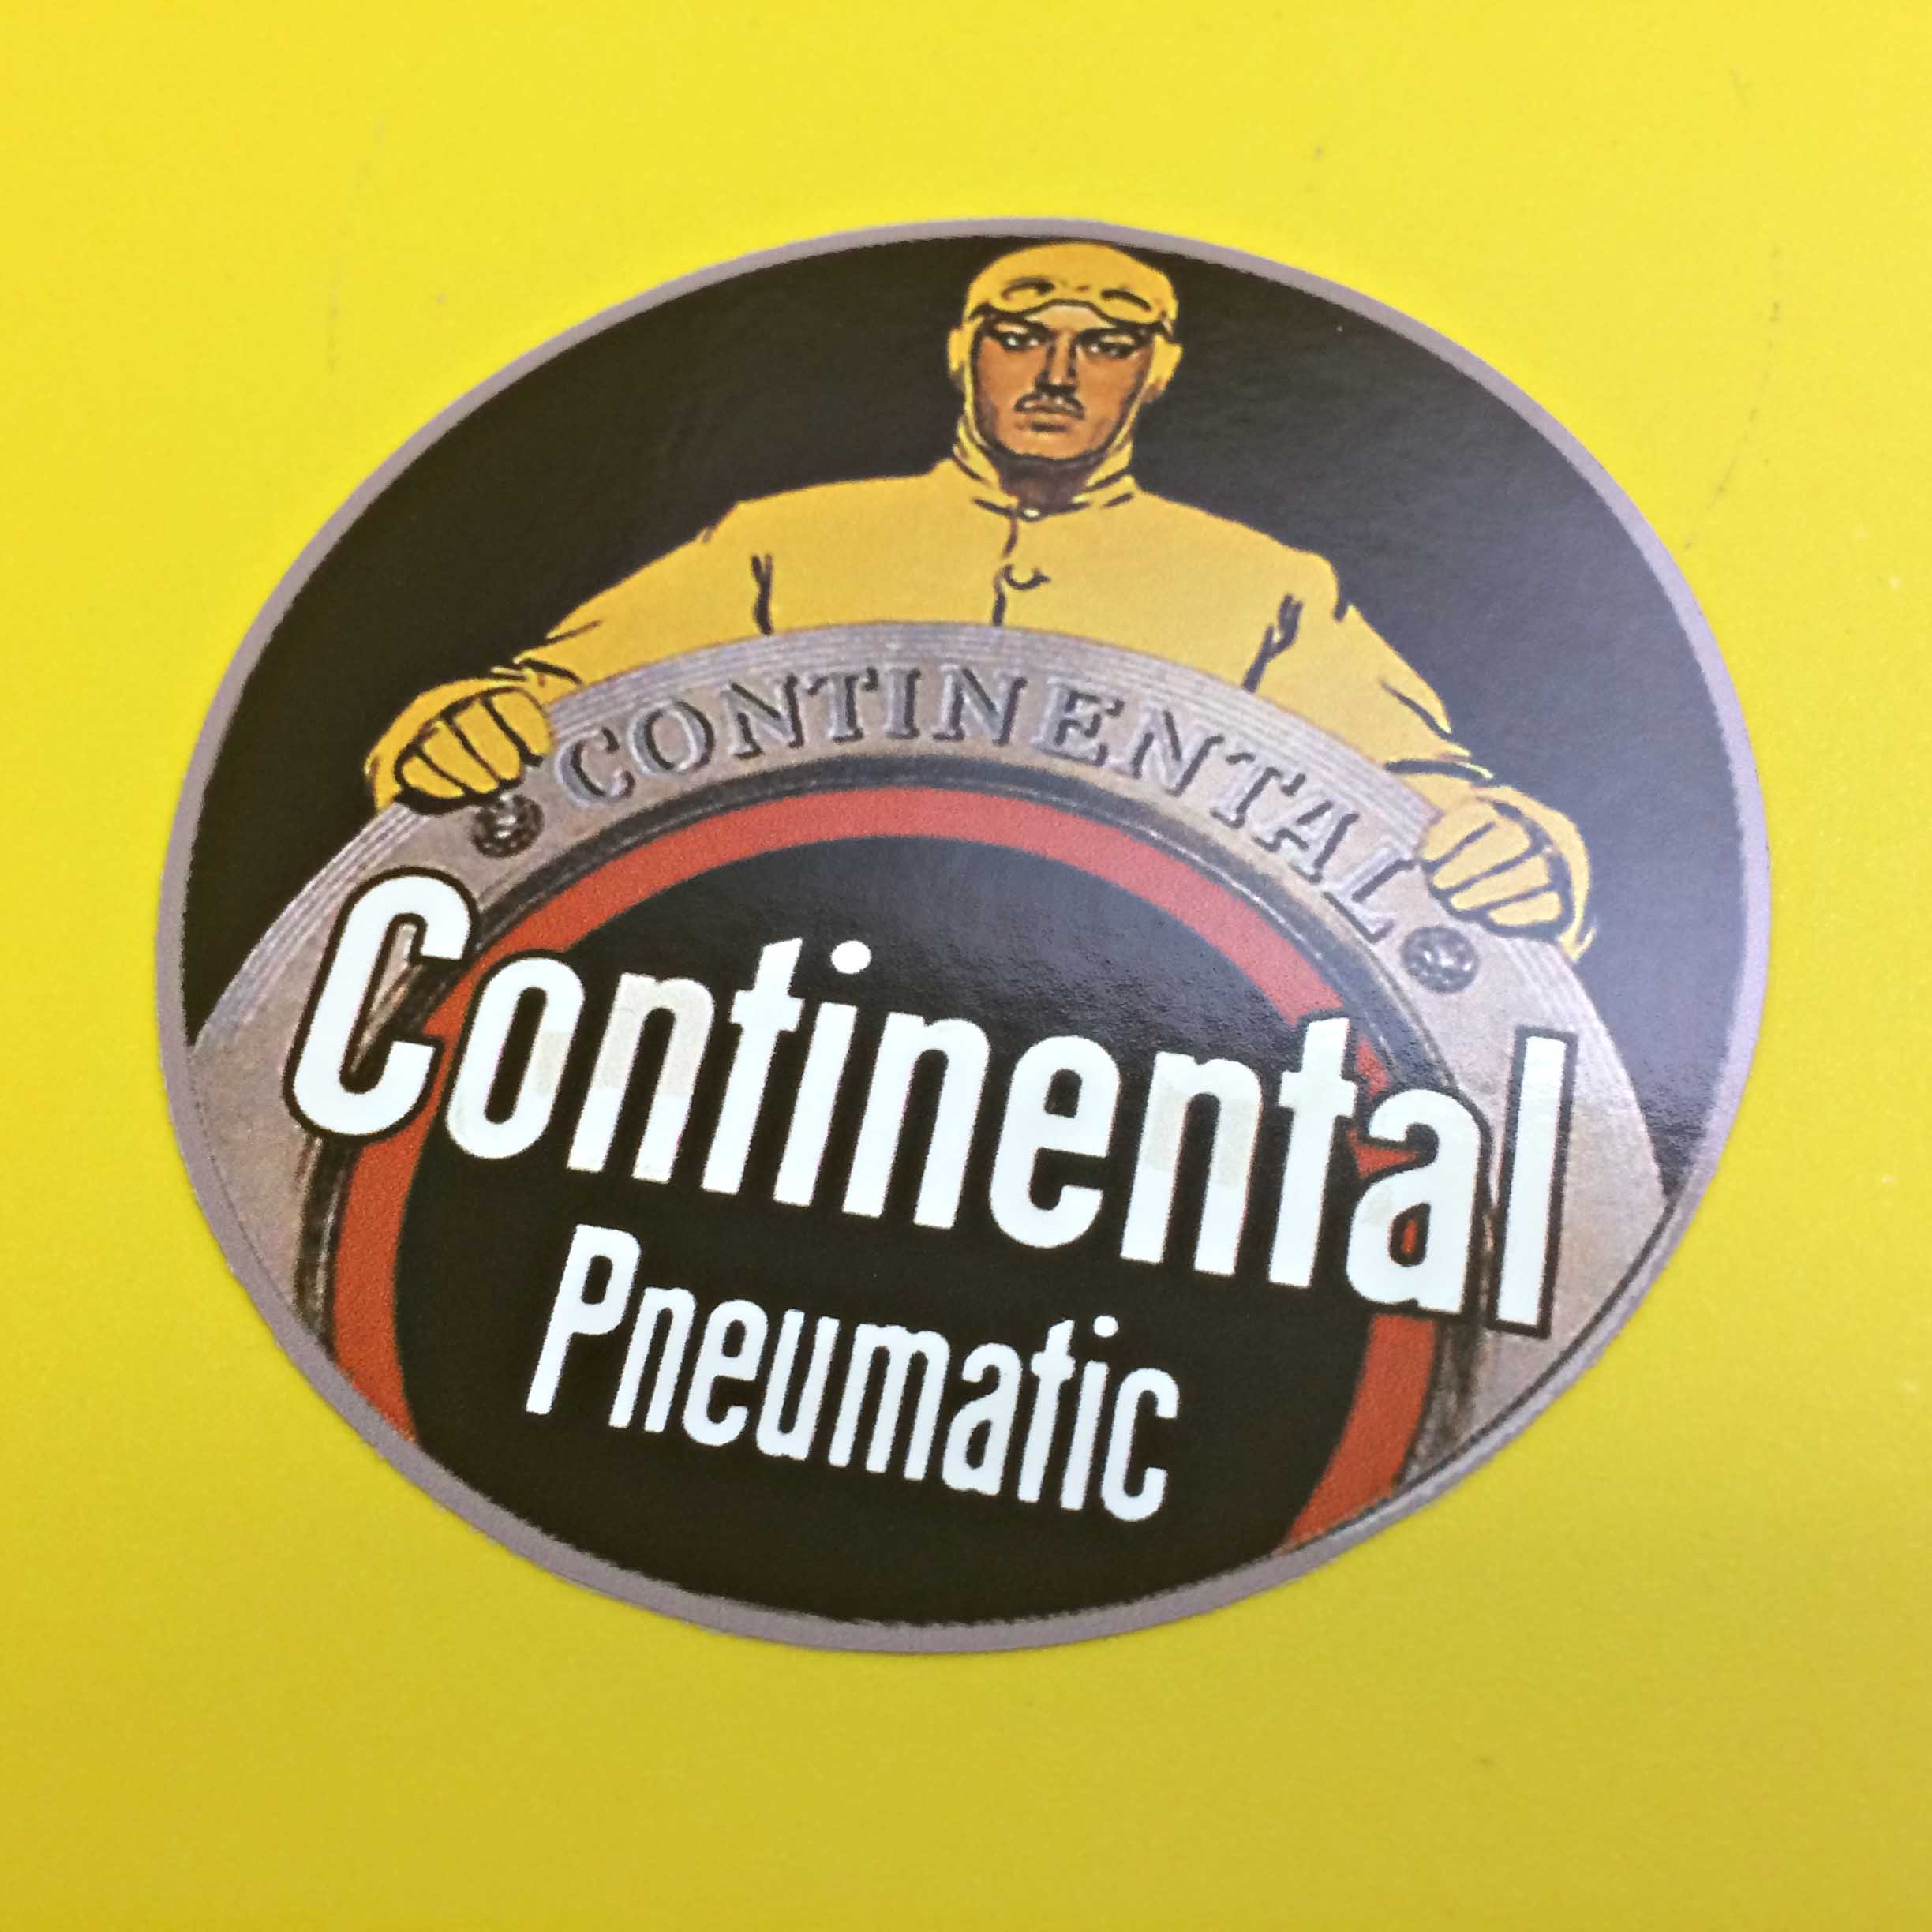 Continental Pneumatic in white lettering on a black circular sticker. A man wearing a yellow vintage car racing suit with goggles and ear muffs is standing behind and resting both hands on a Continental tyre.